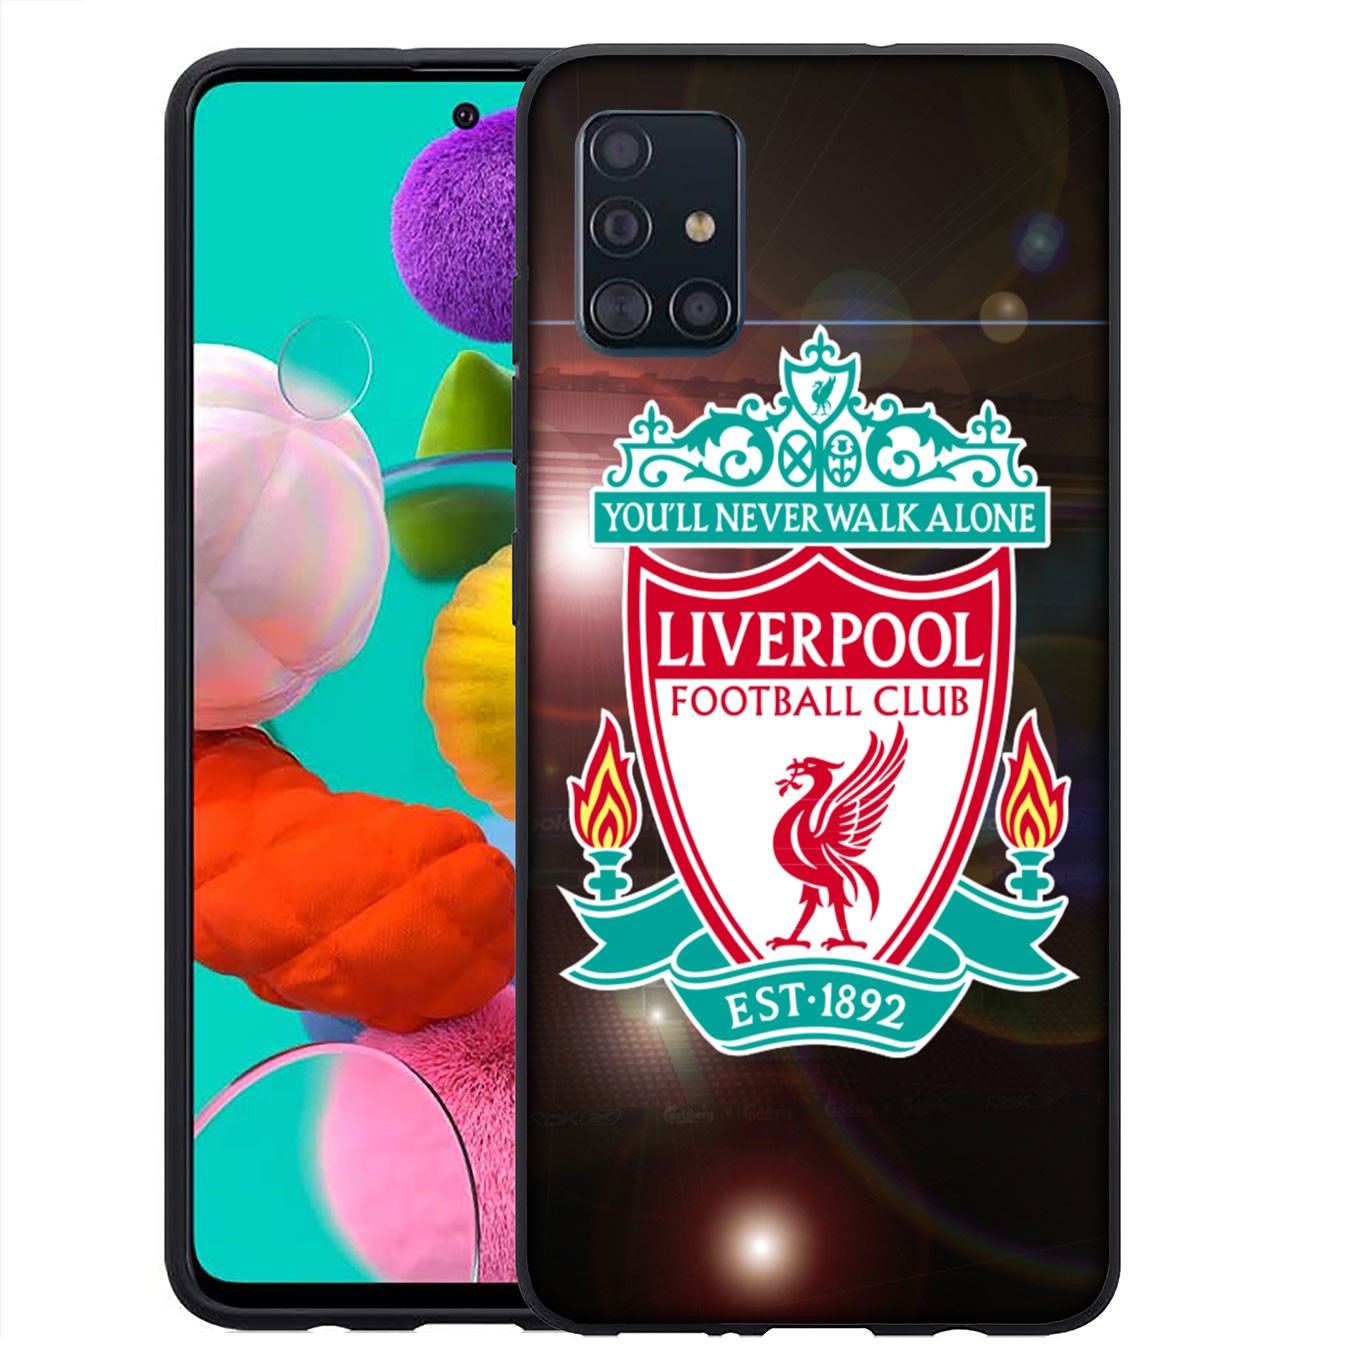 Samsung Galaxy A02S J2 J4 J5 J6 Plus J7 Prime A02 M02 j6+ A42 + Casing Soft Silicone logo Liverpool Football Phone Case